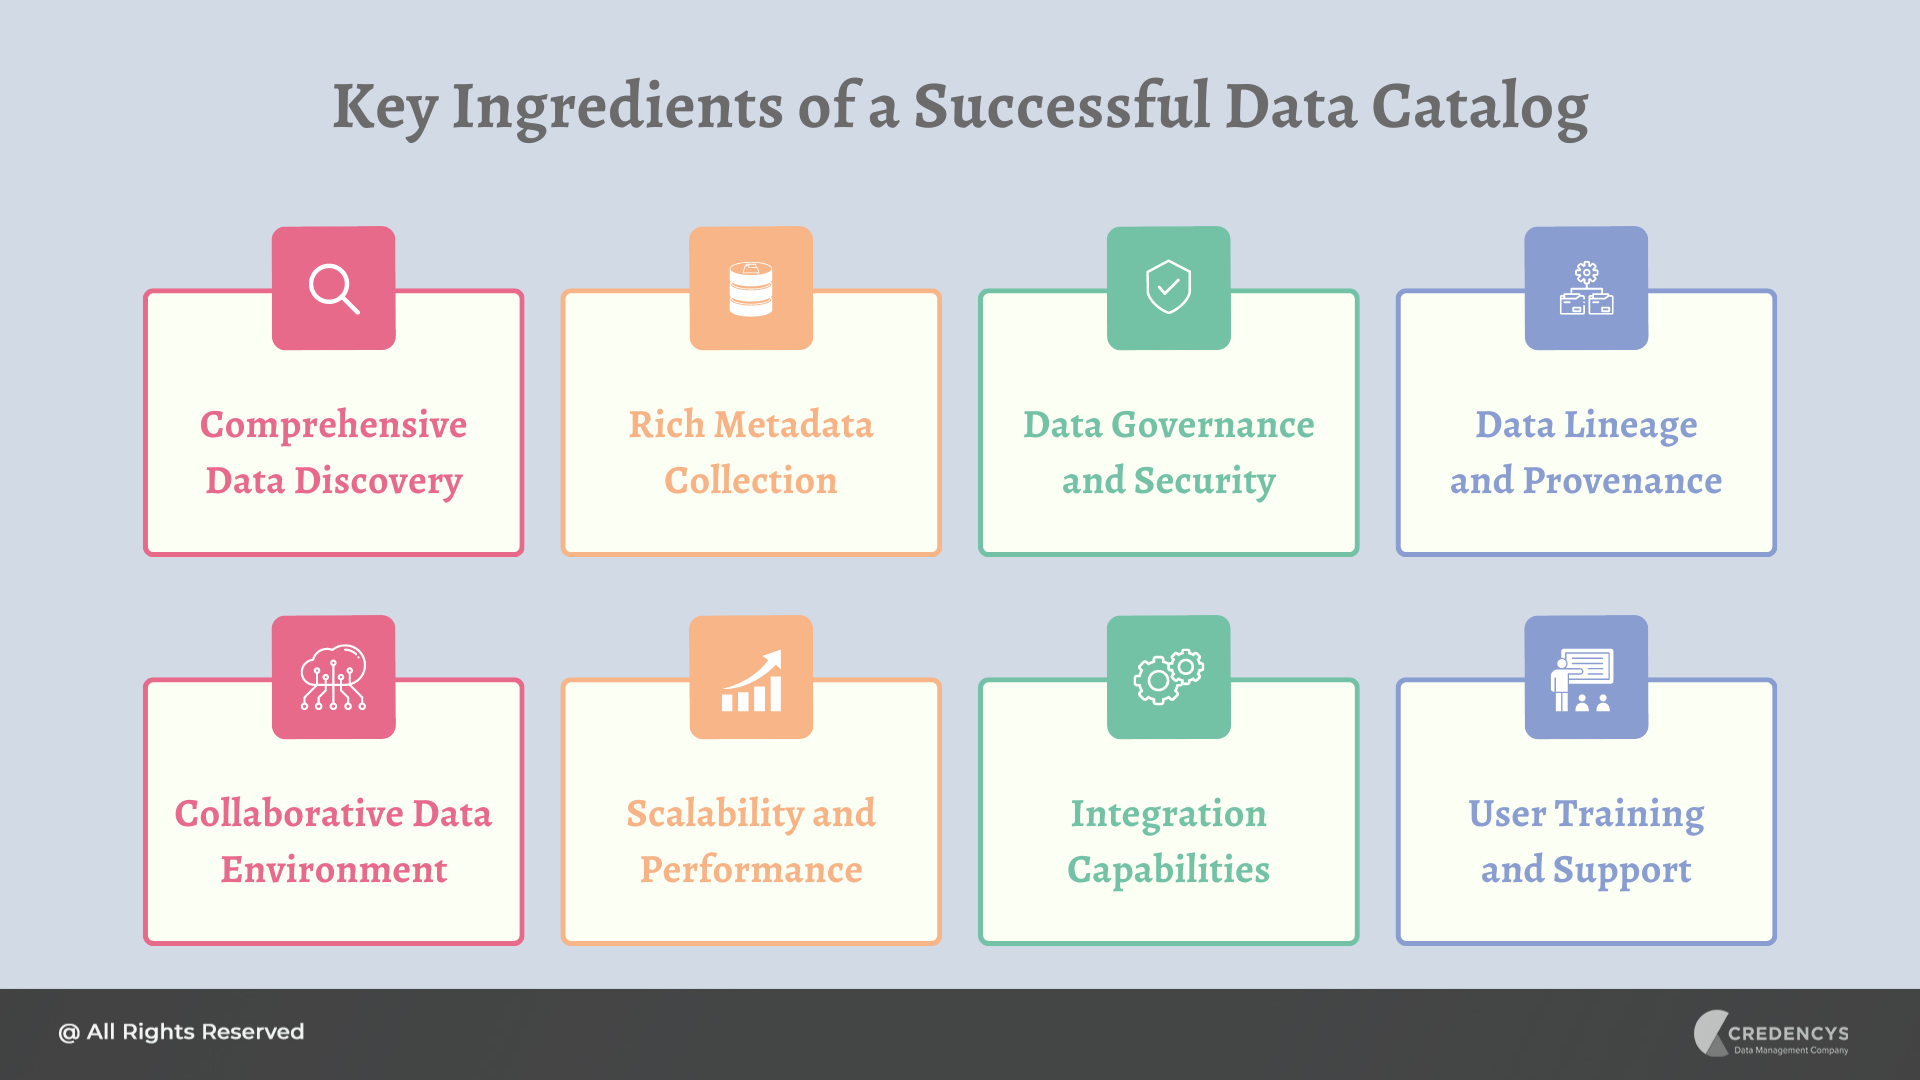 Key Ingredients of a Successful Data Catalog